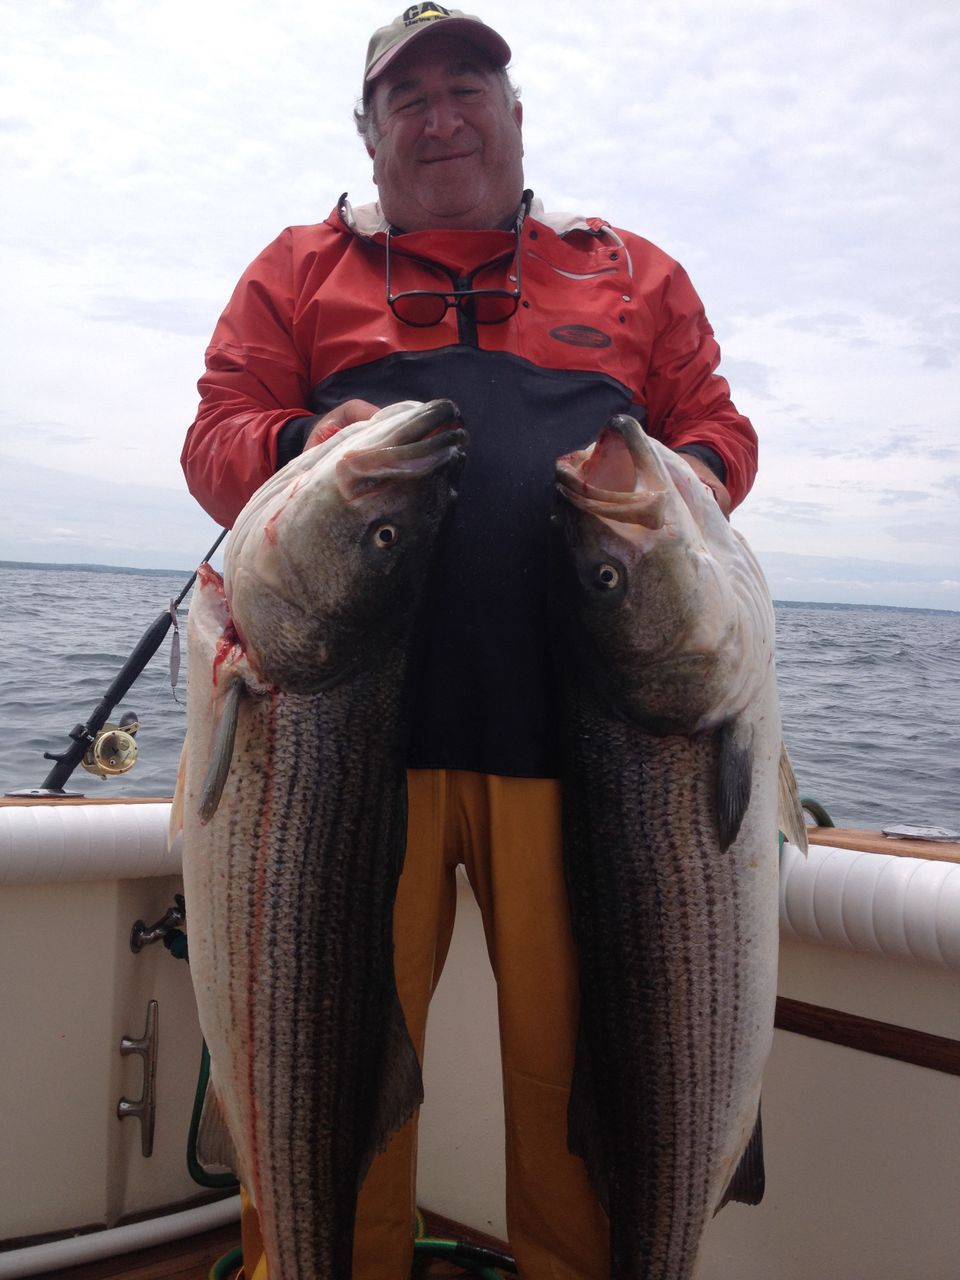 Rob on boat holding 2 huge striped bass